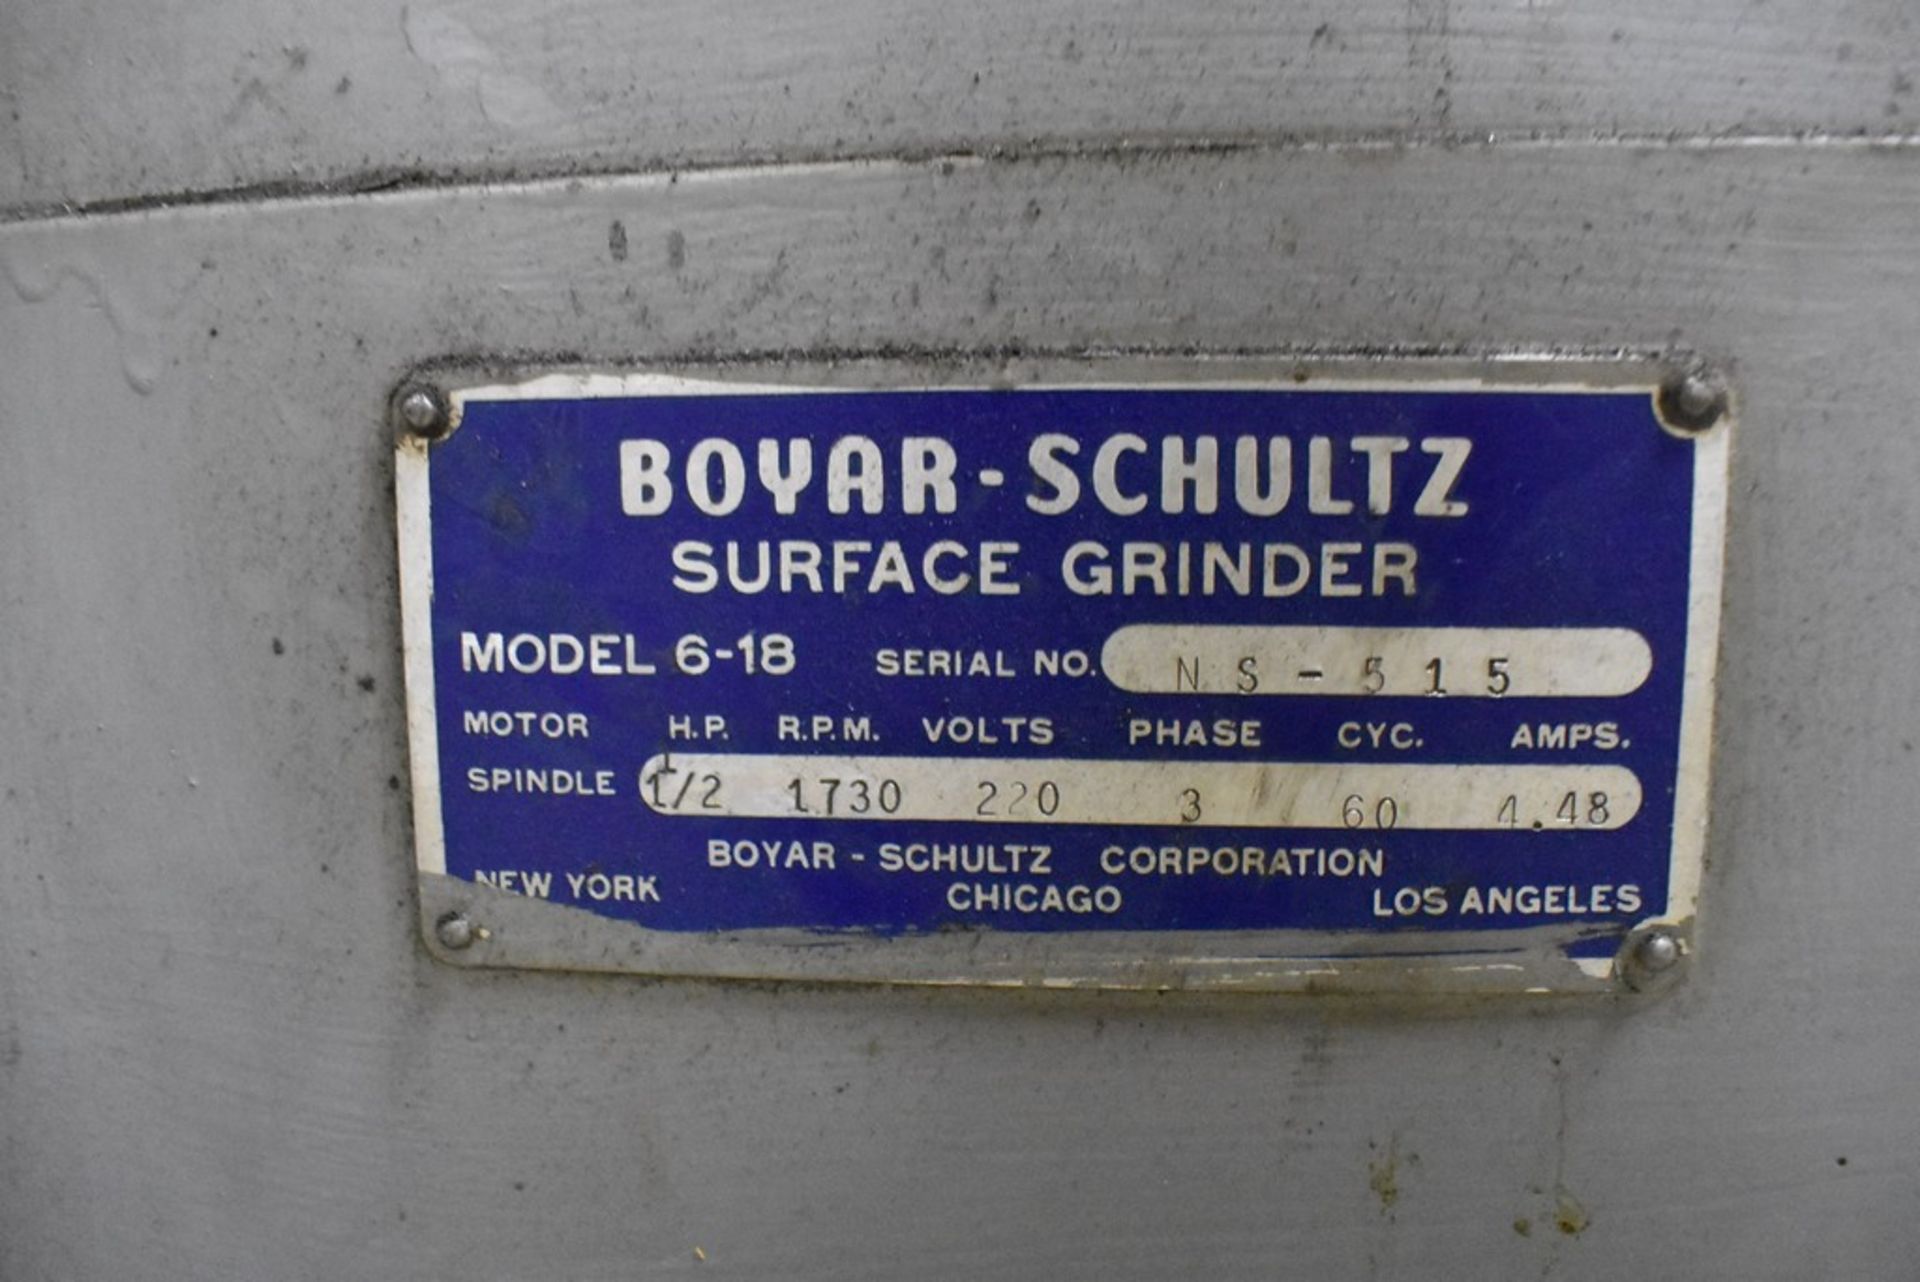 BOYAR SCHULTZ NO. 6-18 HAND FEED SURFACE GRINDER S/N NS-515 WITH 6" X 12" CHUCK MOUNTED ON 6" X - Image 5 of 5